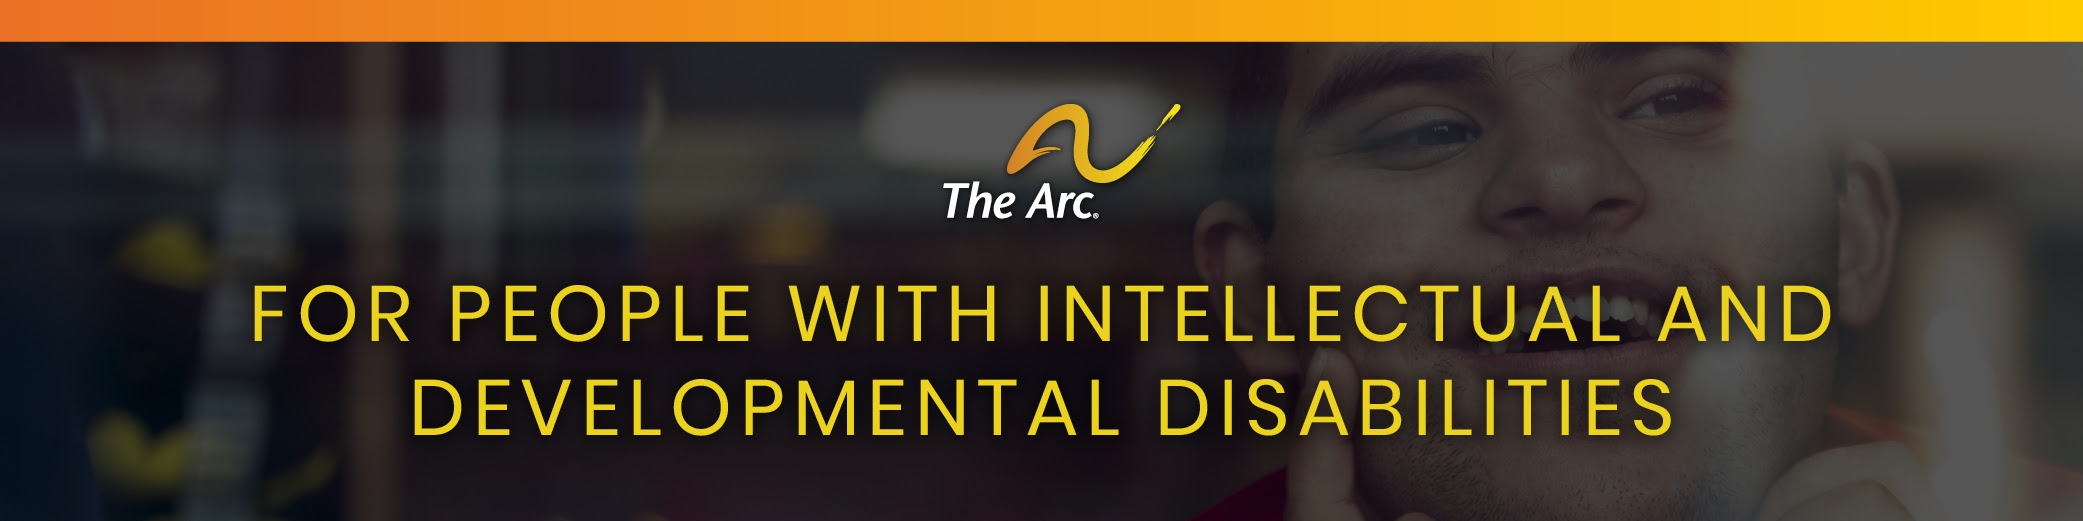 The Arc for people with intellectual and developmental disabilities